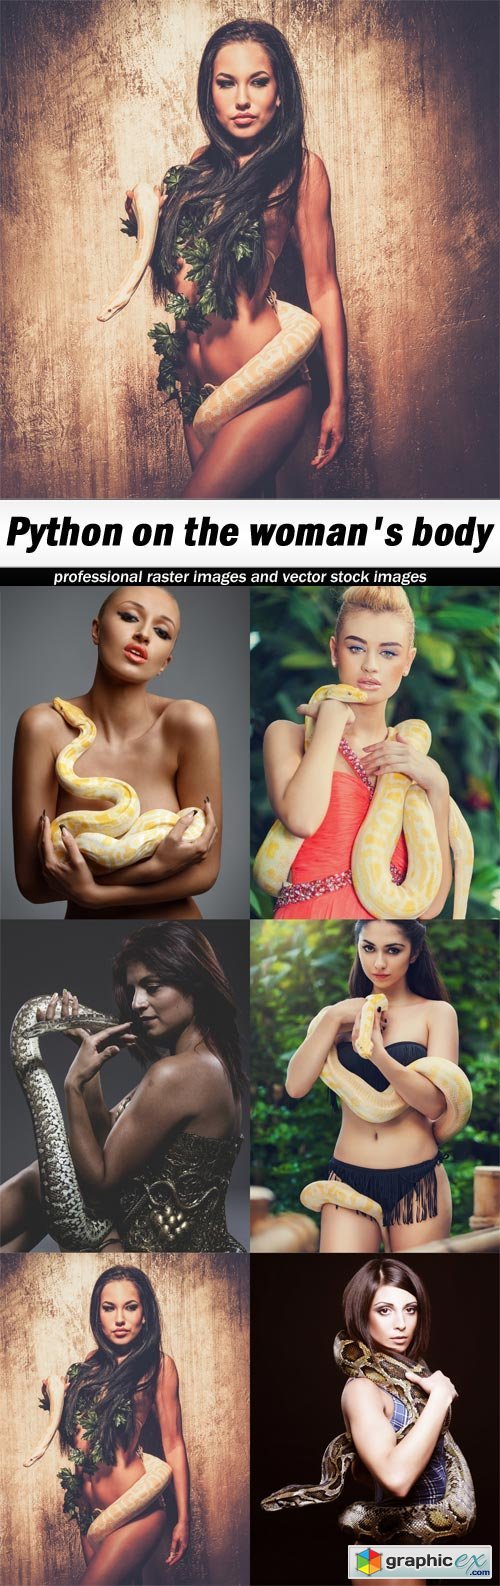 Python on the woman's body